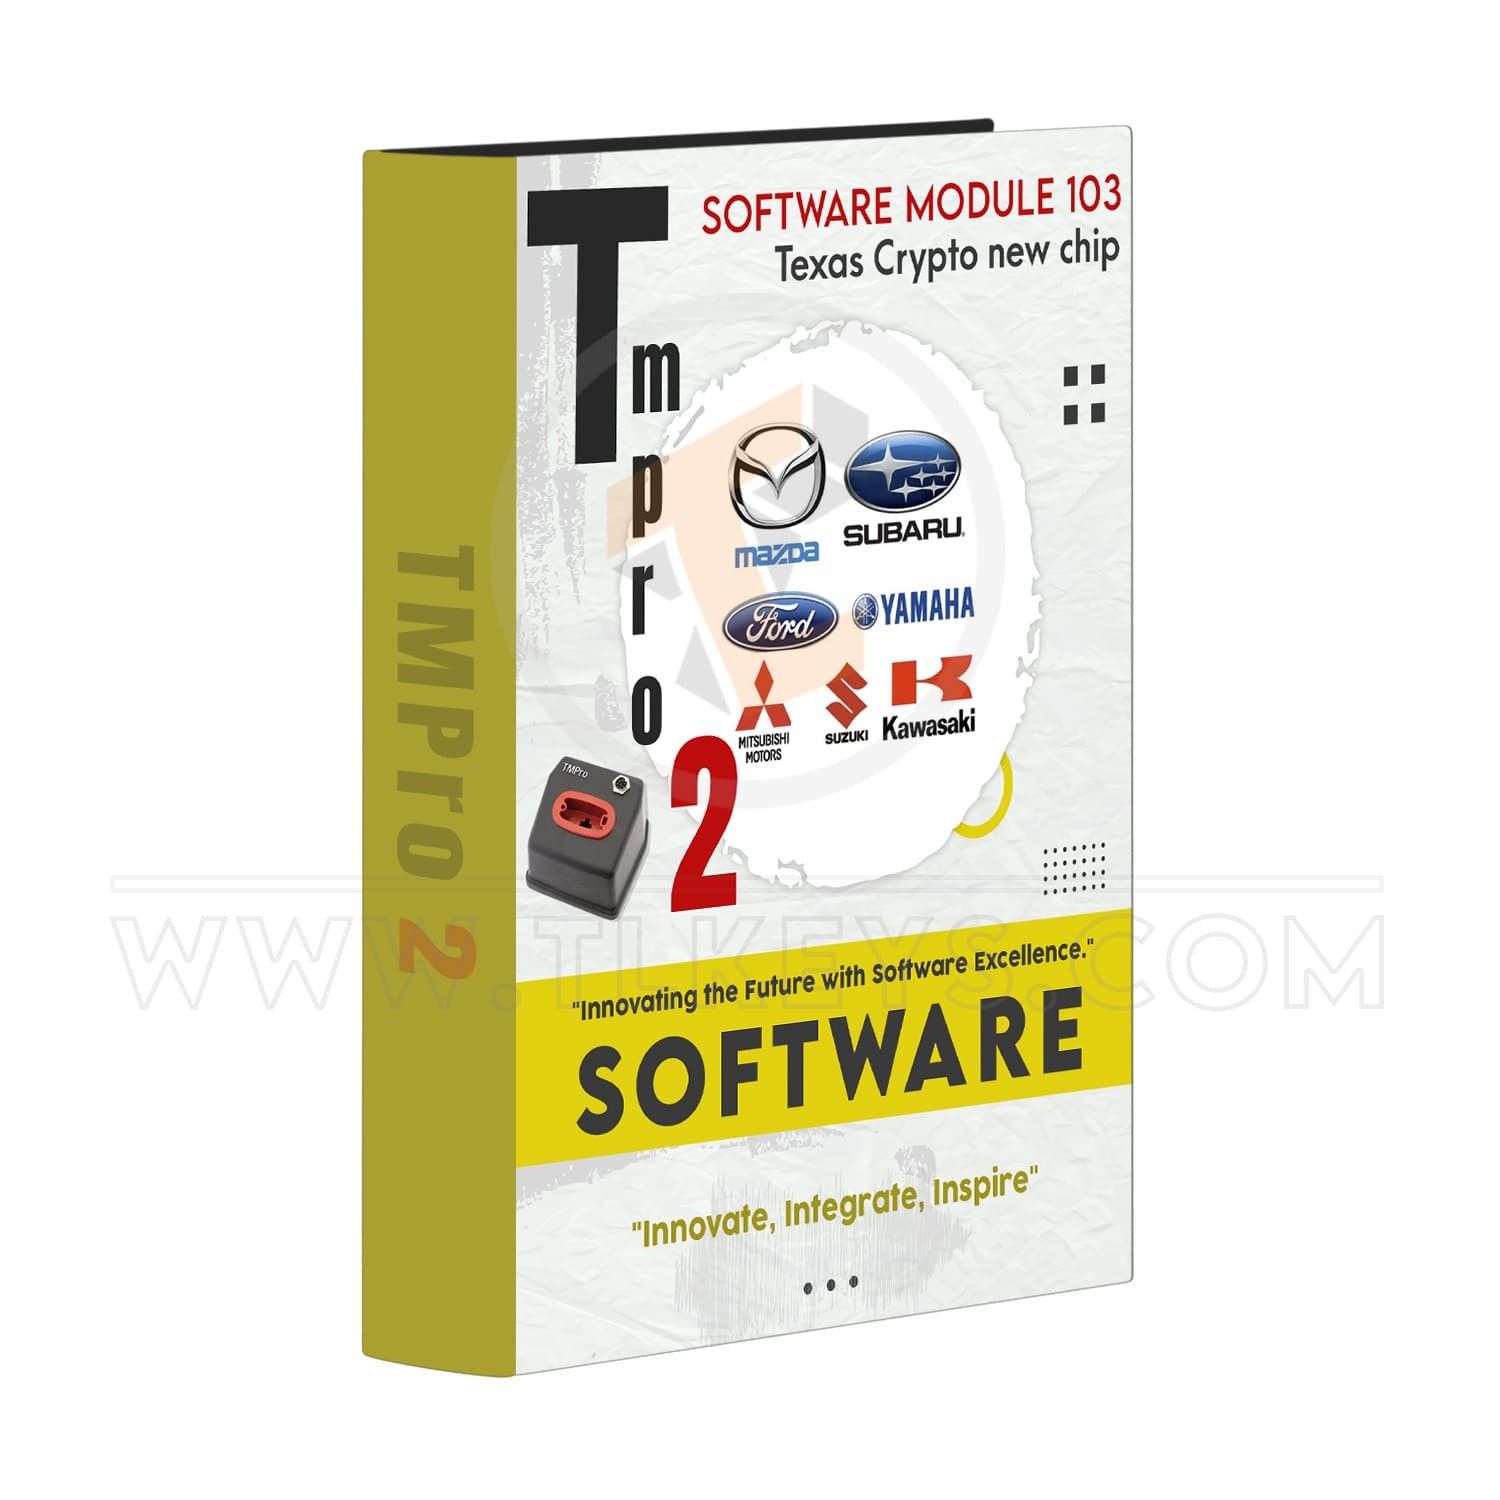 Tmpro 2 Tmpro 2 Software module 103 – Texas Crypto new chi software